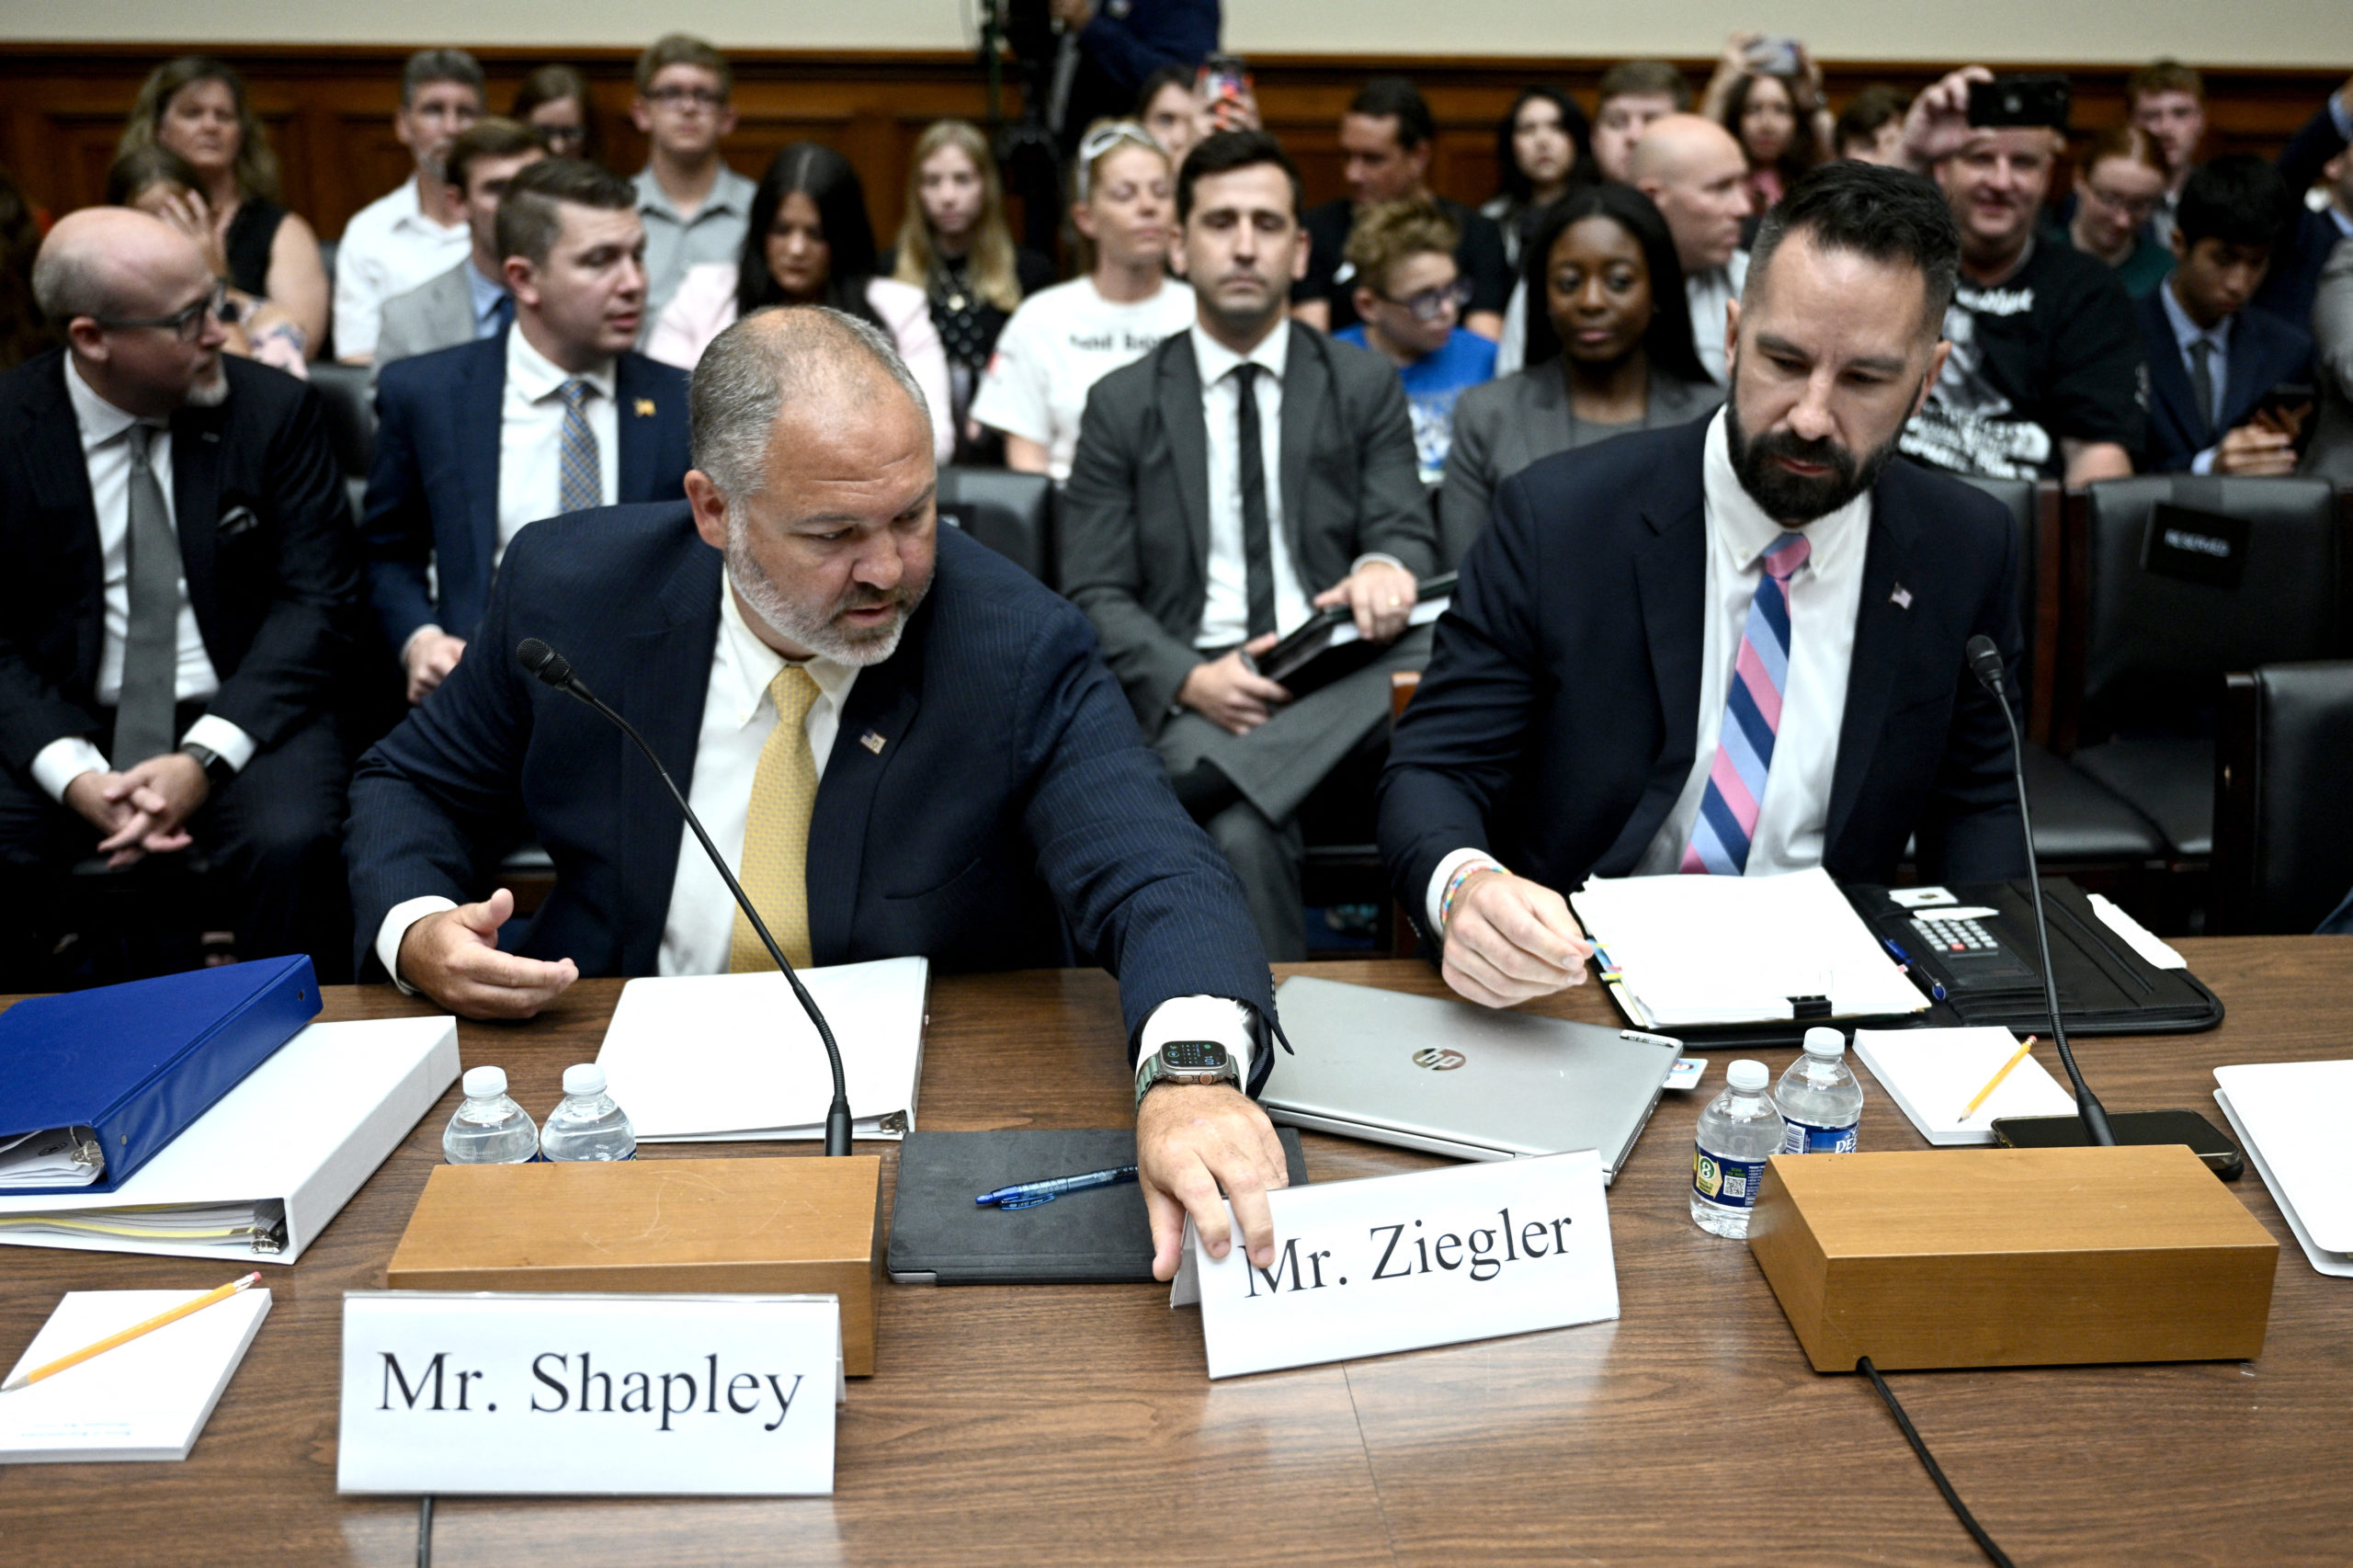 Gary Shapley (L), Supervisory Special Agent at the Internal Revenue Service, adjusts the nametags as he and Joe Ziegler, Internal Revenue Service (IRS) Whistleblower X, arrive to testify before the House Committee on Oversight and Accountability during a hearing regarding the criminal investigation into the Bidens, on Capitol Hill in Washington, DC, on July 19, 2023. (Photo by Brendan SMIALOWSKI / AFP) (Photo by BRENDAN SMIALOWSKI/AFP via Getty Images)